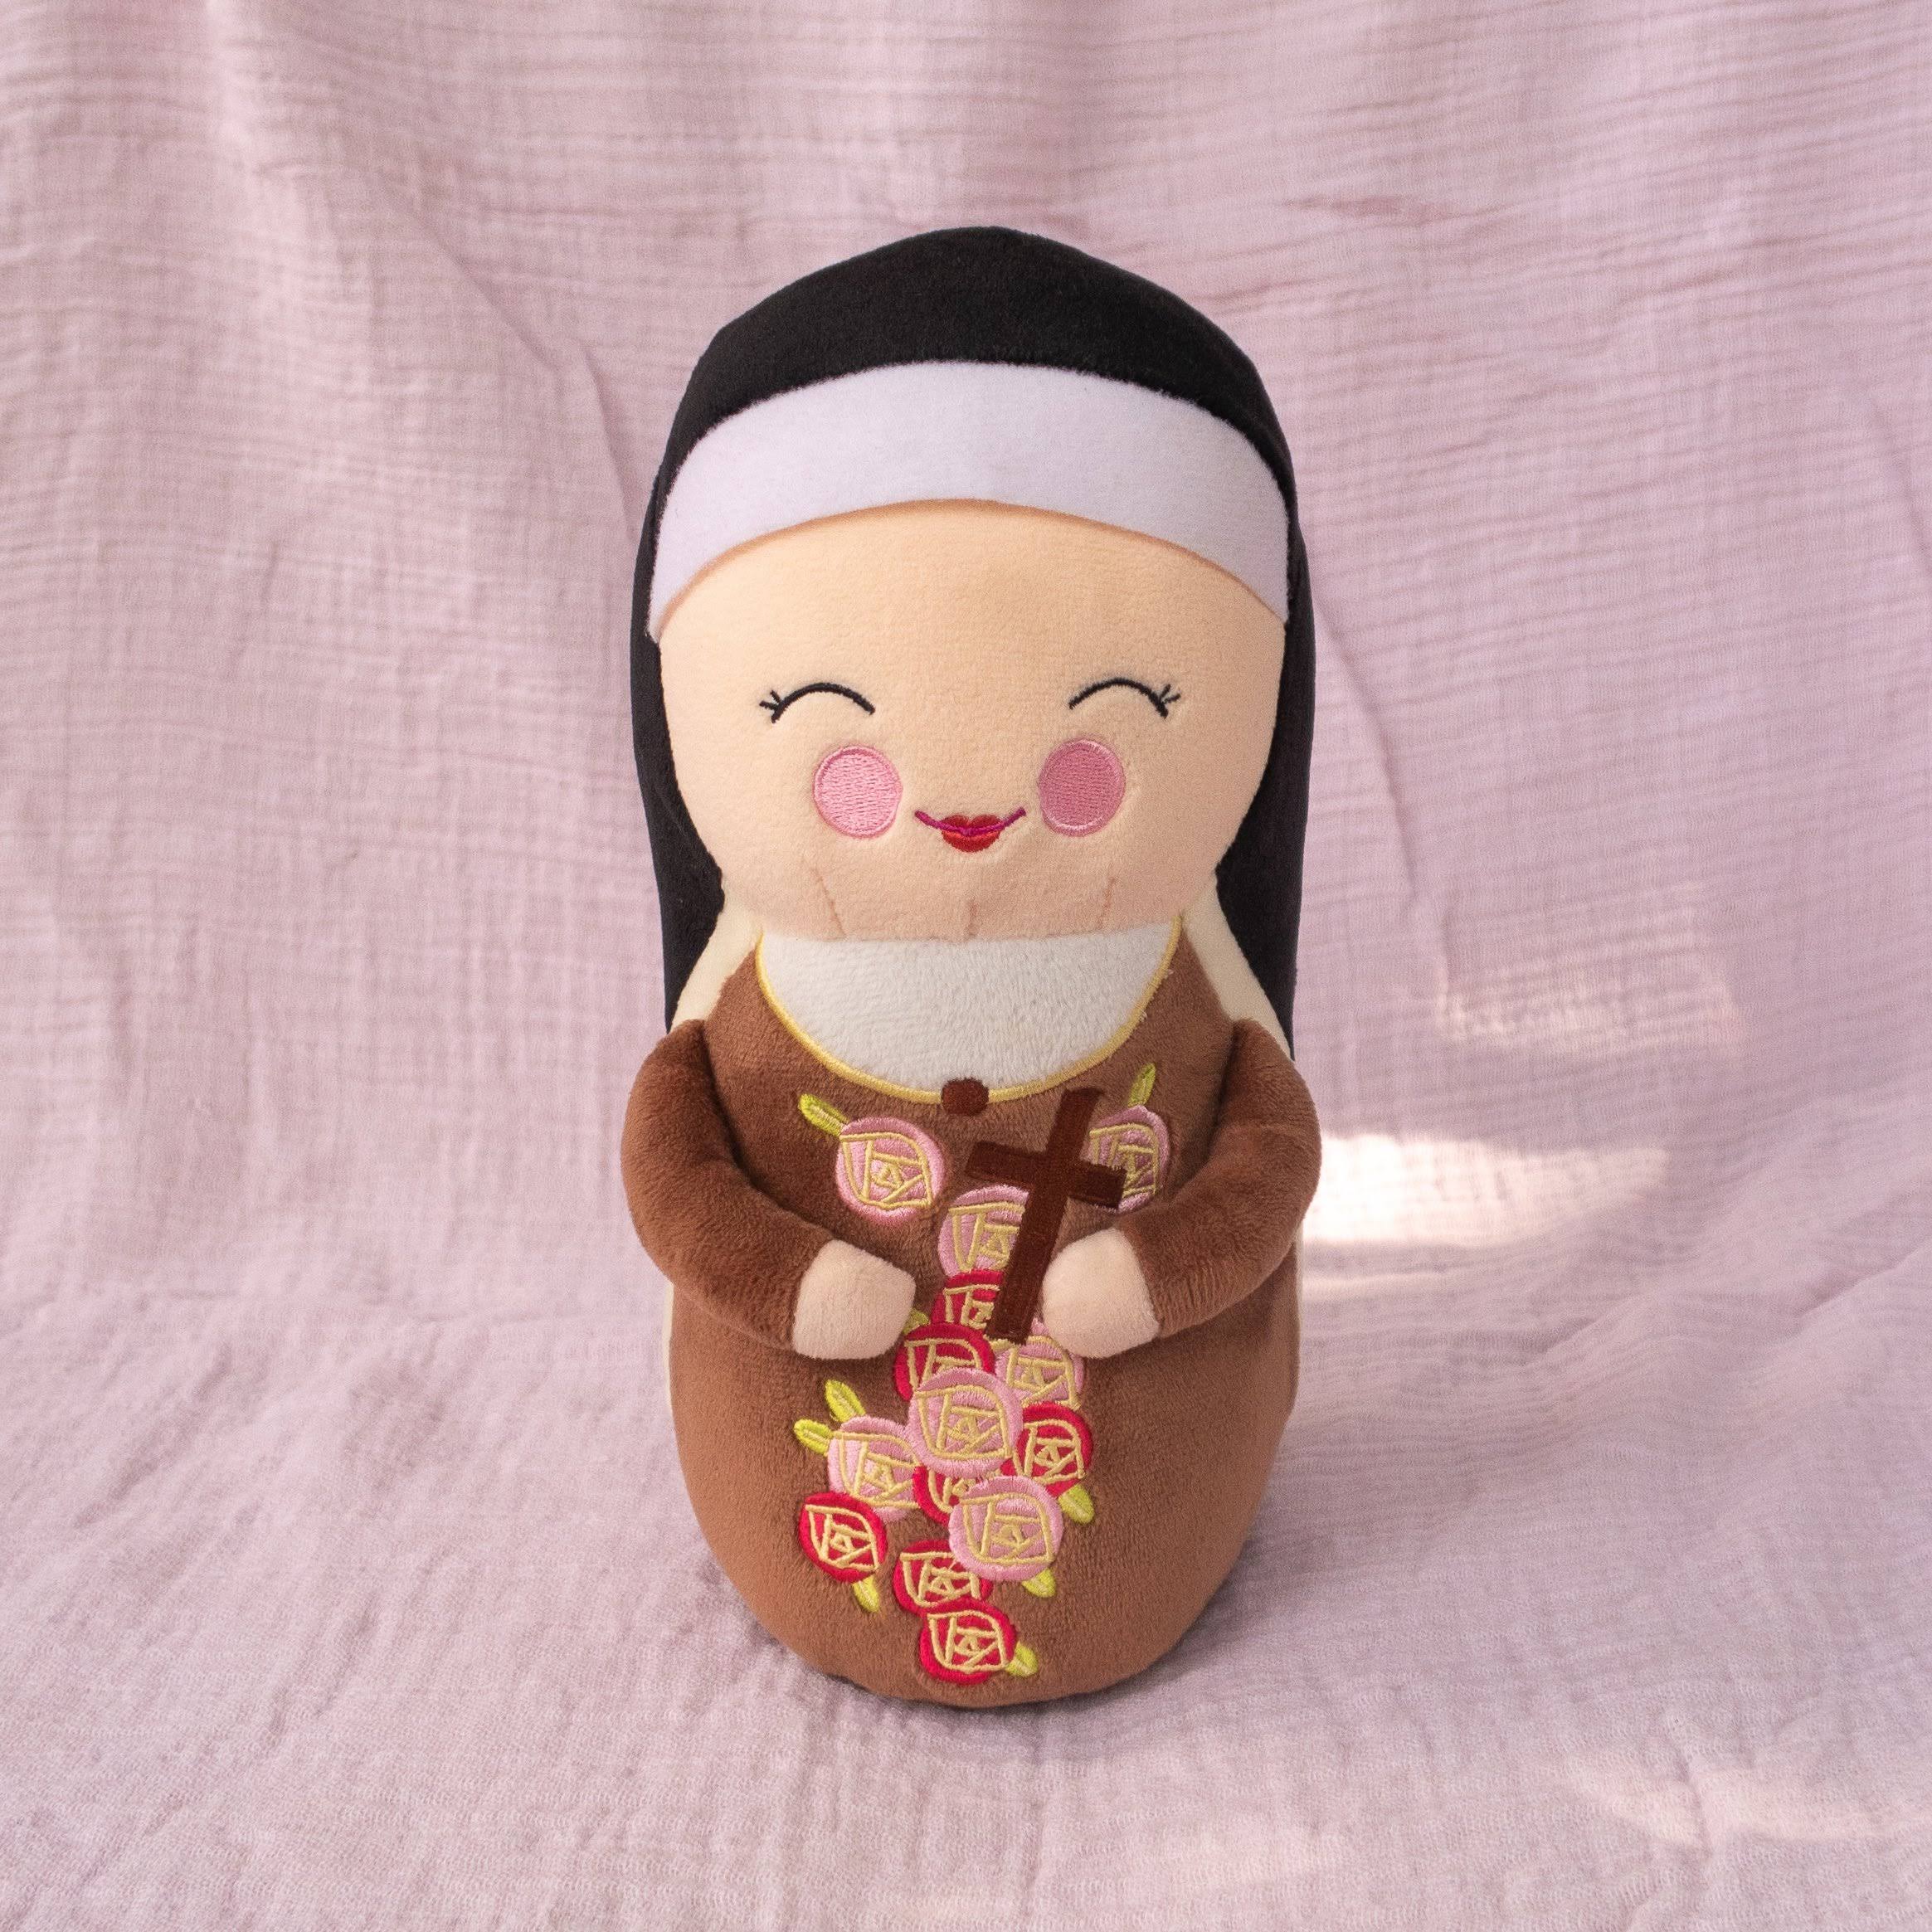 Shining Light Dolls St. Therese of Lisieux 10" Plush Doll Brand New